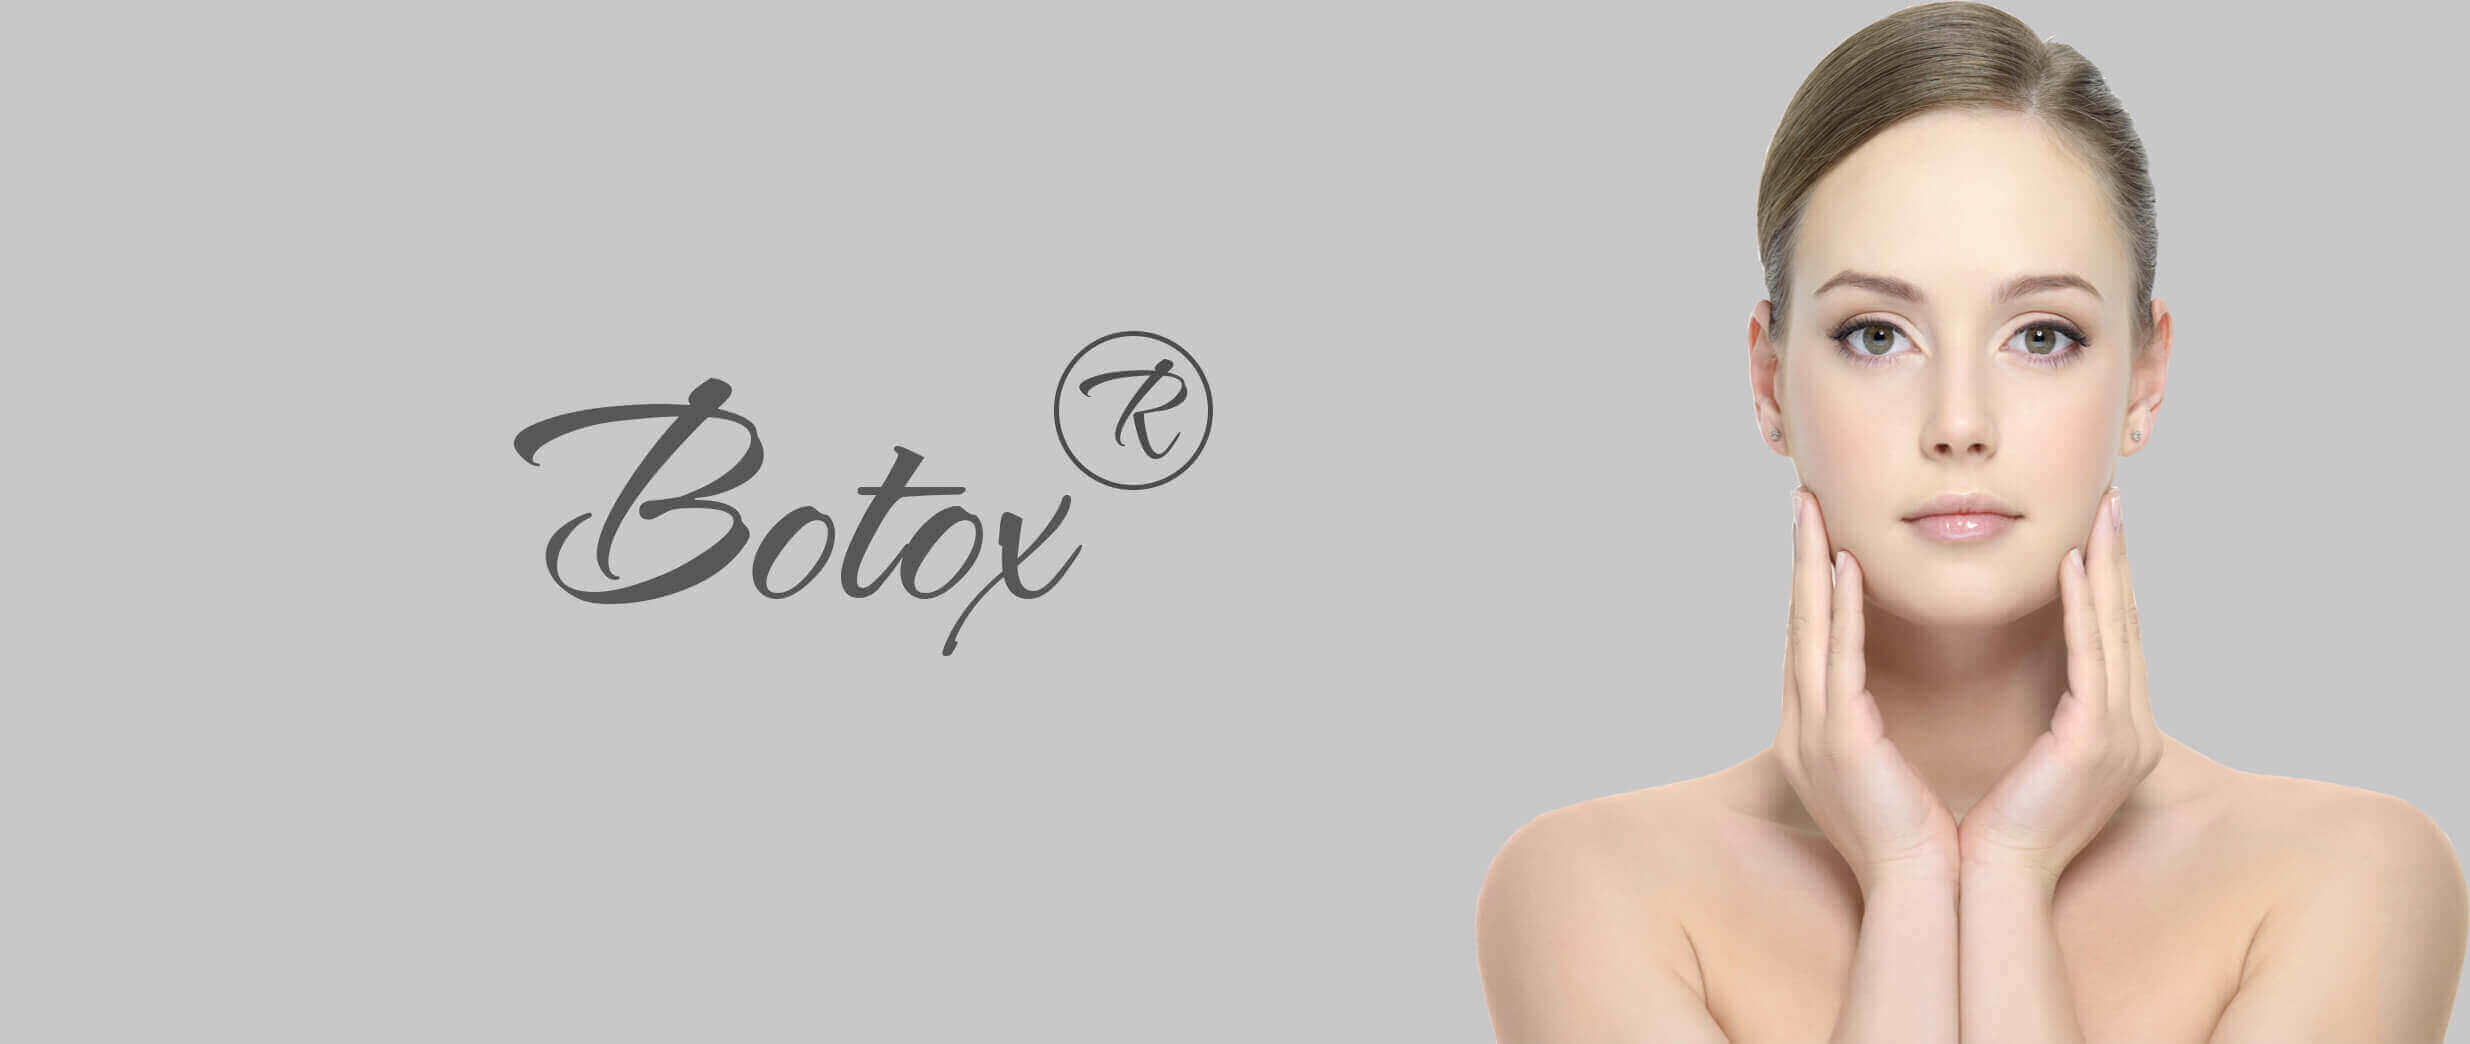 Botox Treatment in South Delhi, Botox Injection cost in ...